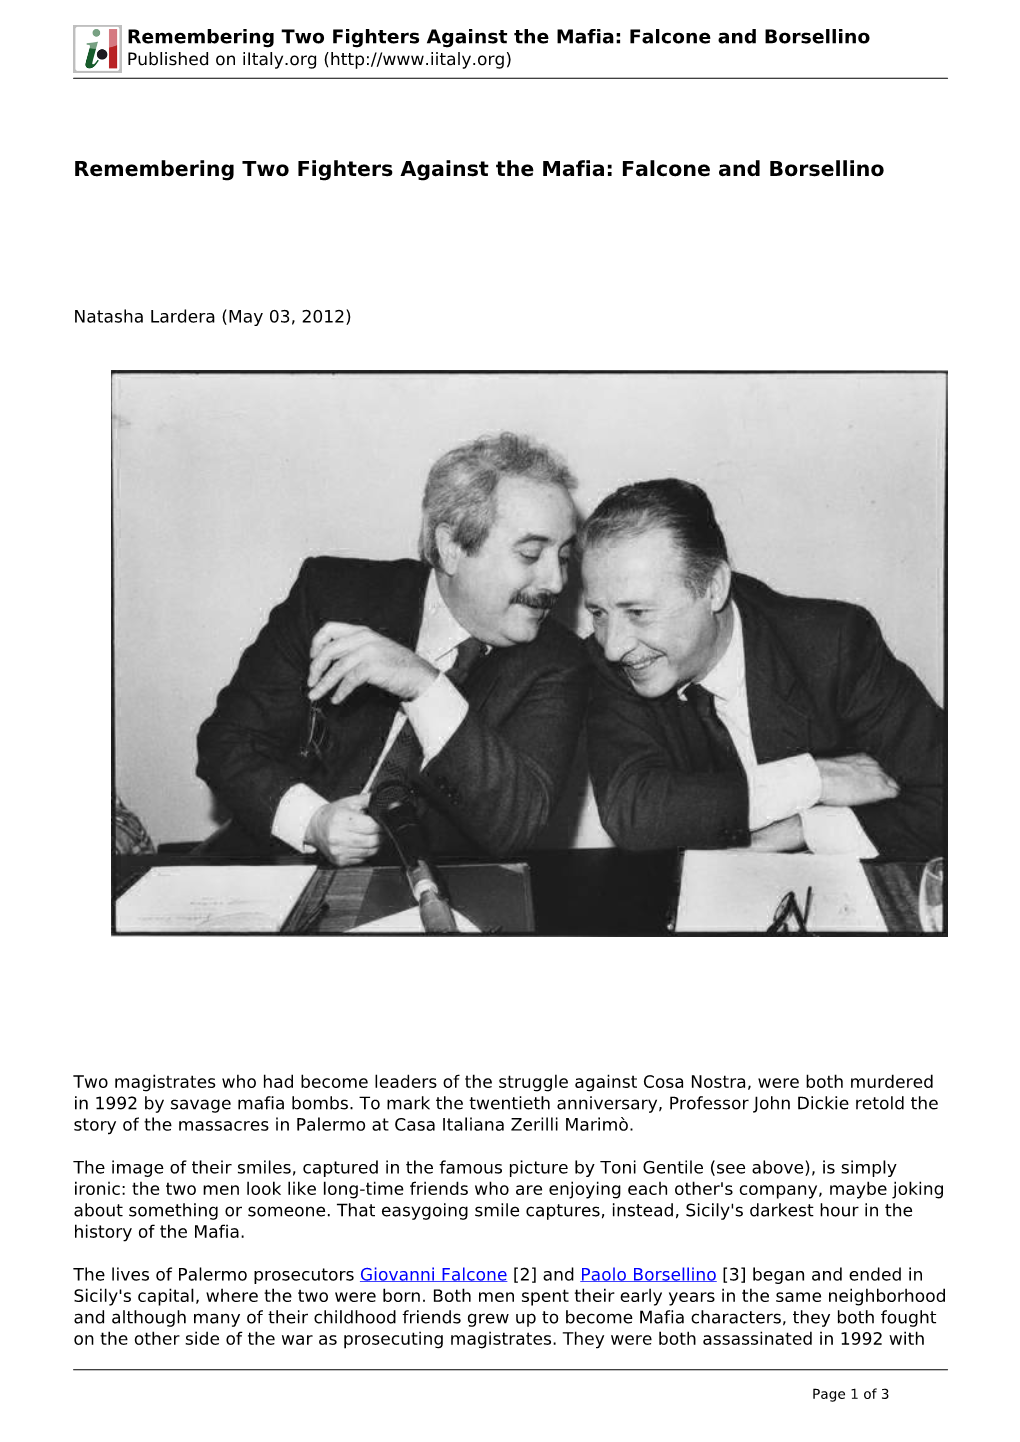 Falcone and Borsellino Published on Iitaly.Org (